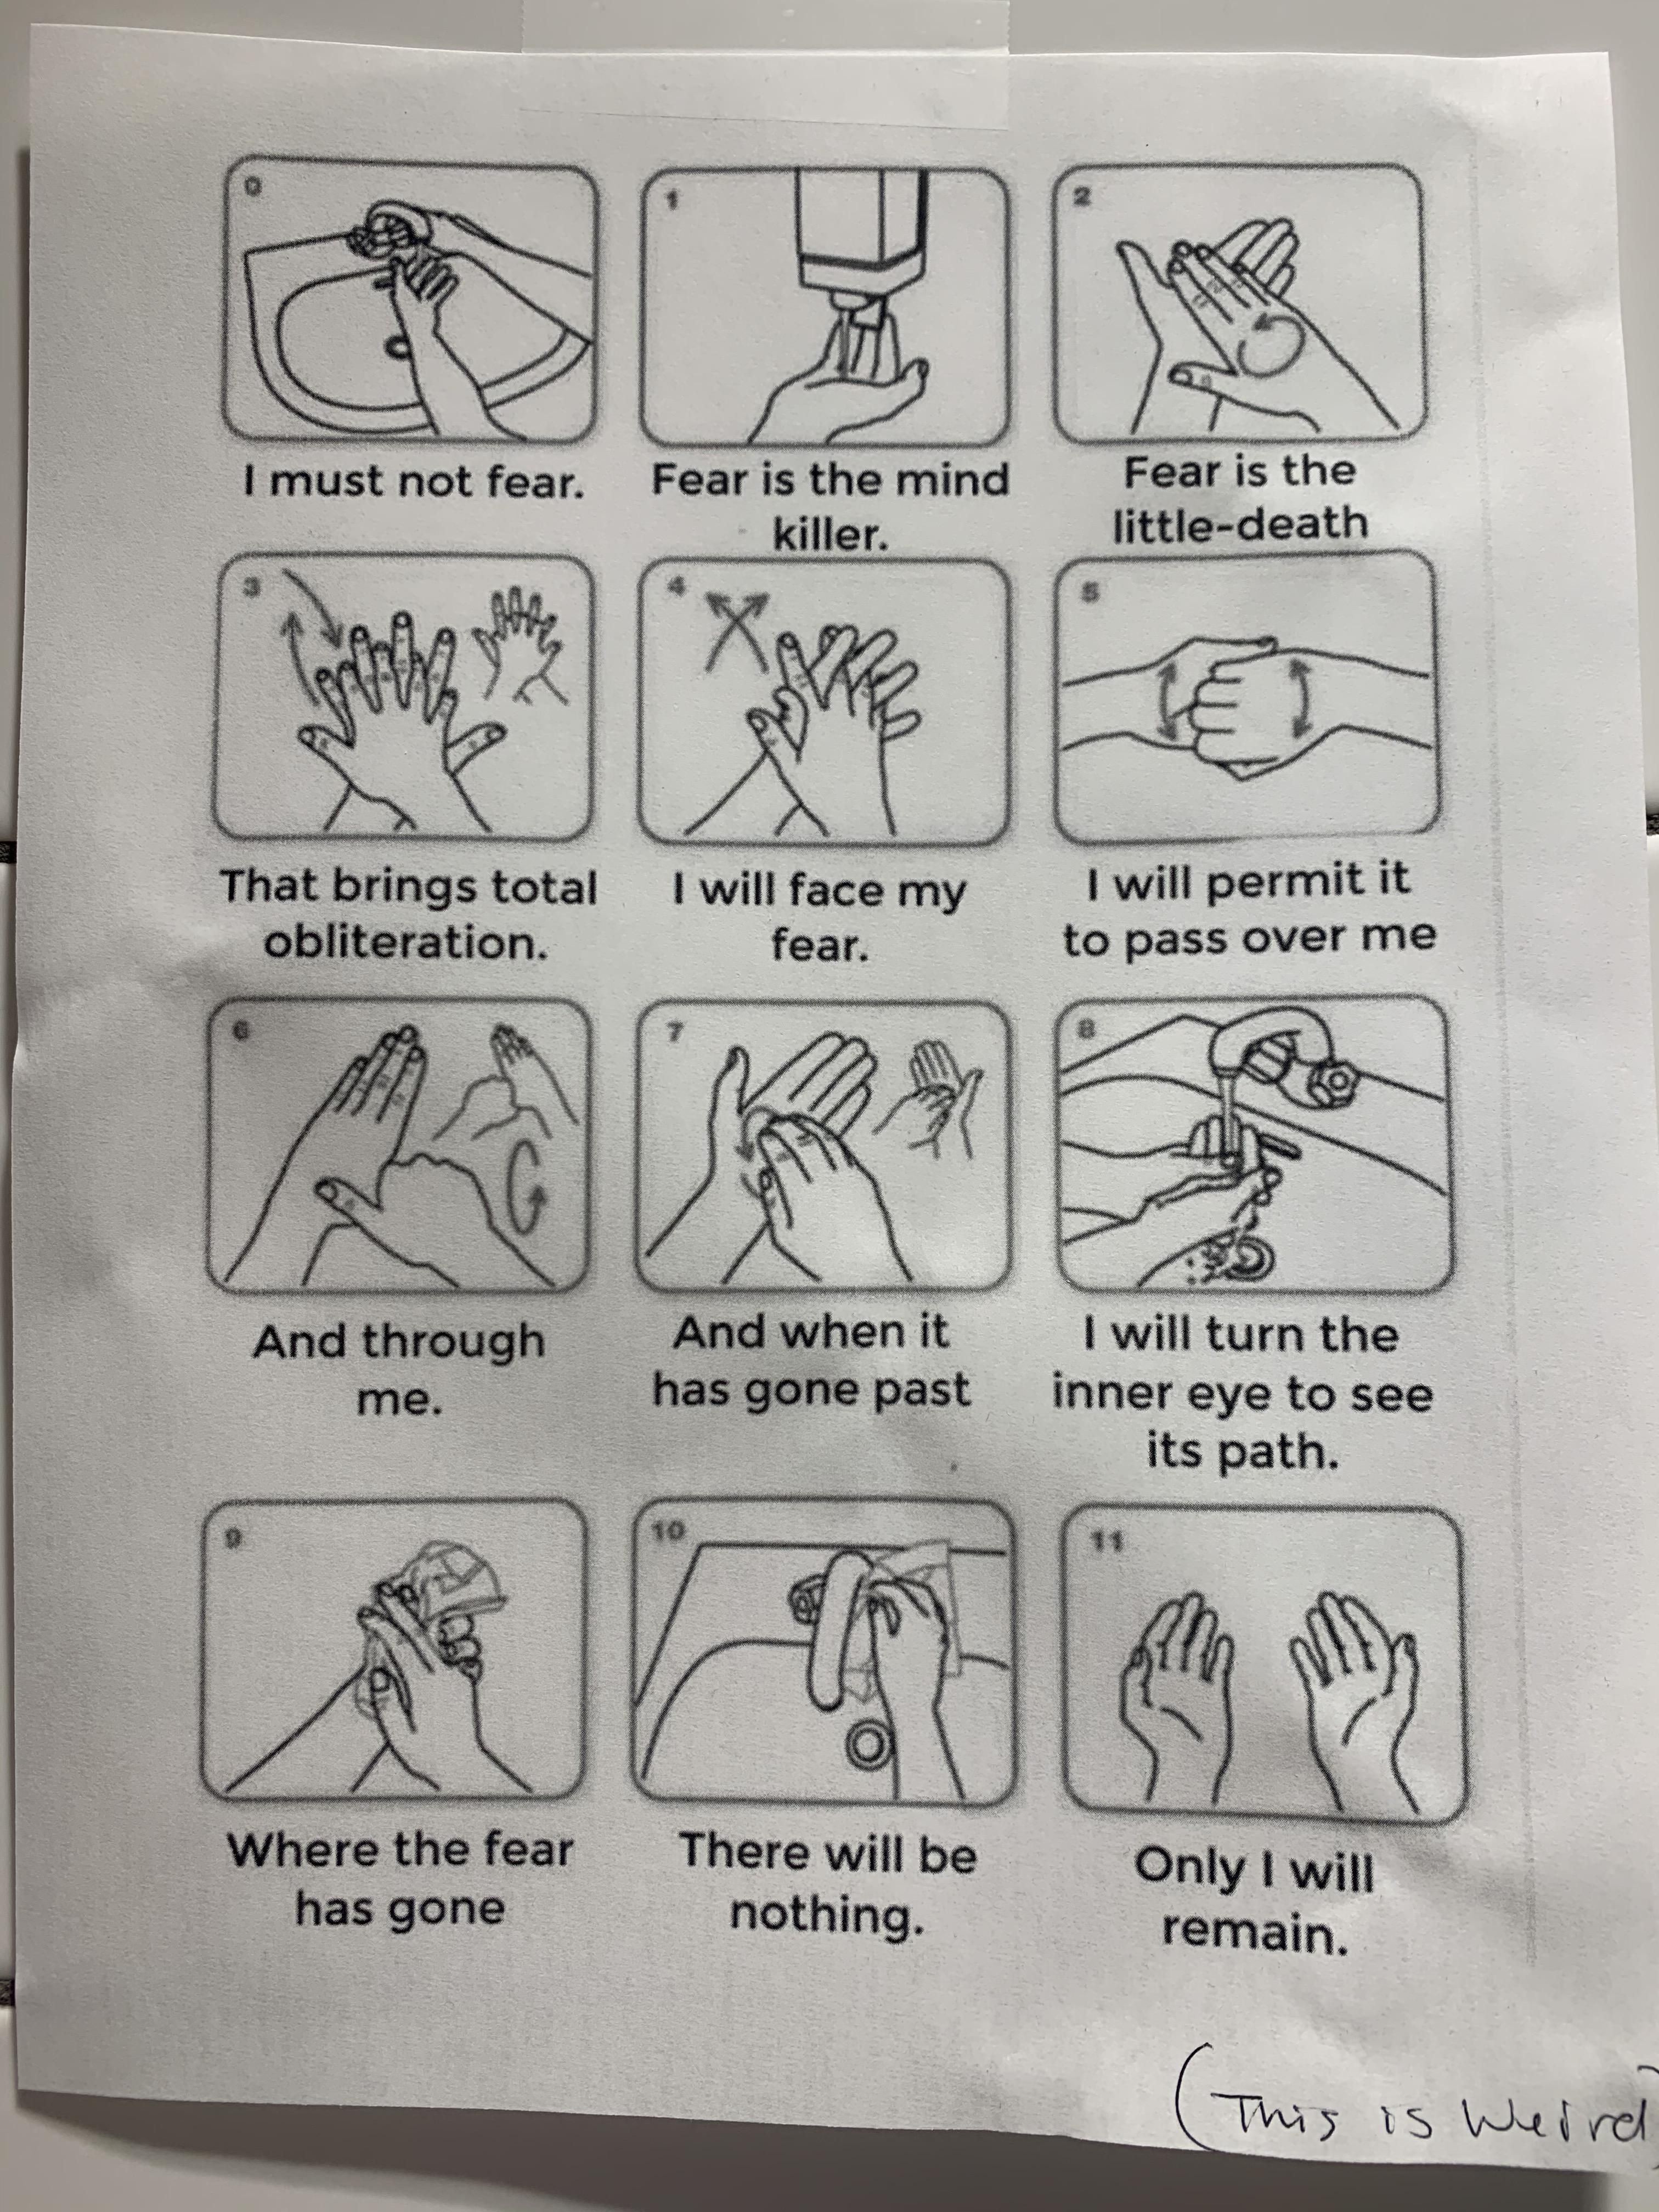 I work in a hospital and I got floated to a different unit today. This was on the wall in their bathroom. What kind of people work here?